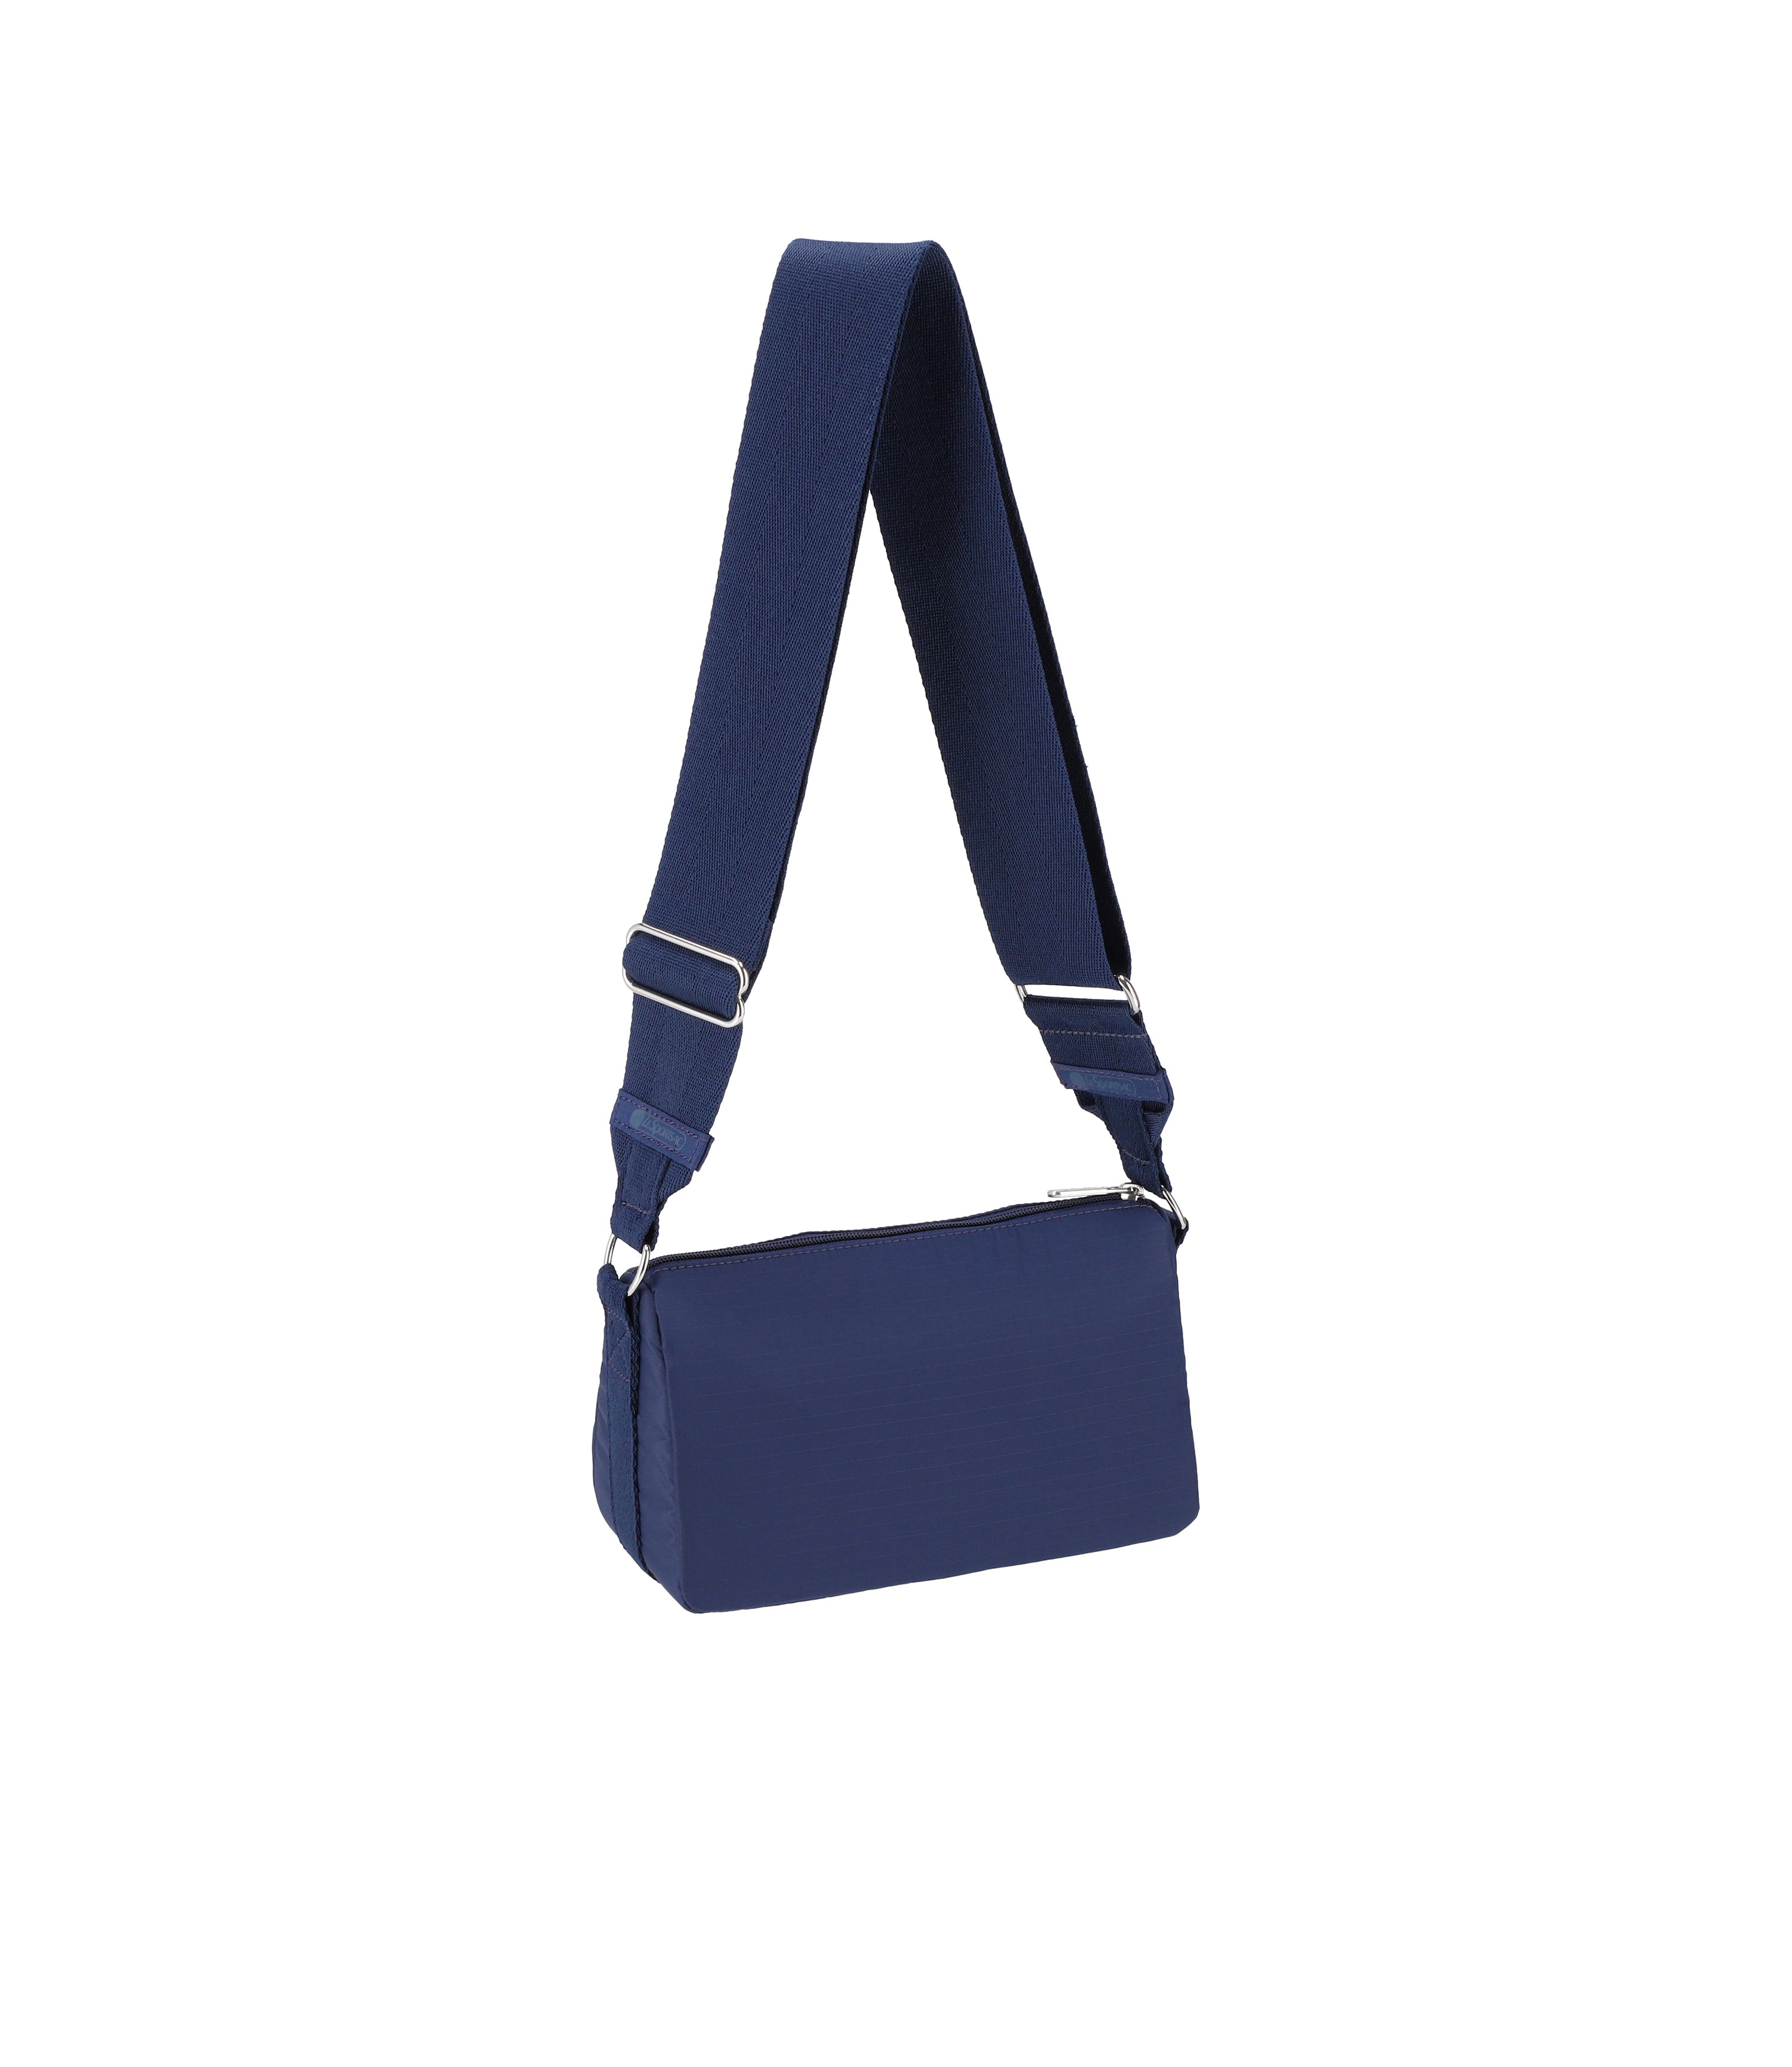 East/West Double Pocket Bag - Navy Blue solid – LeSportsac